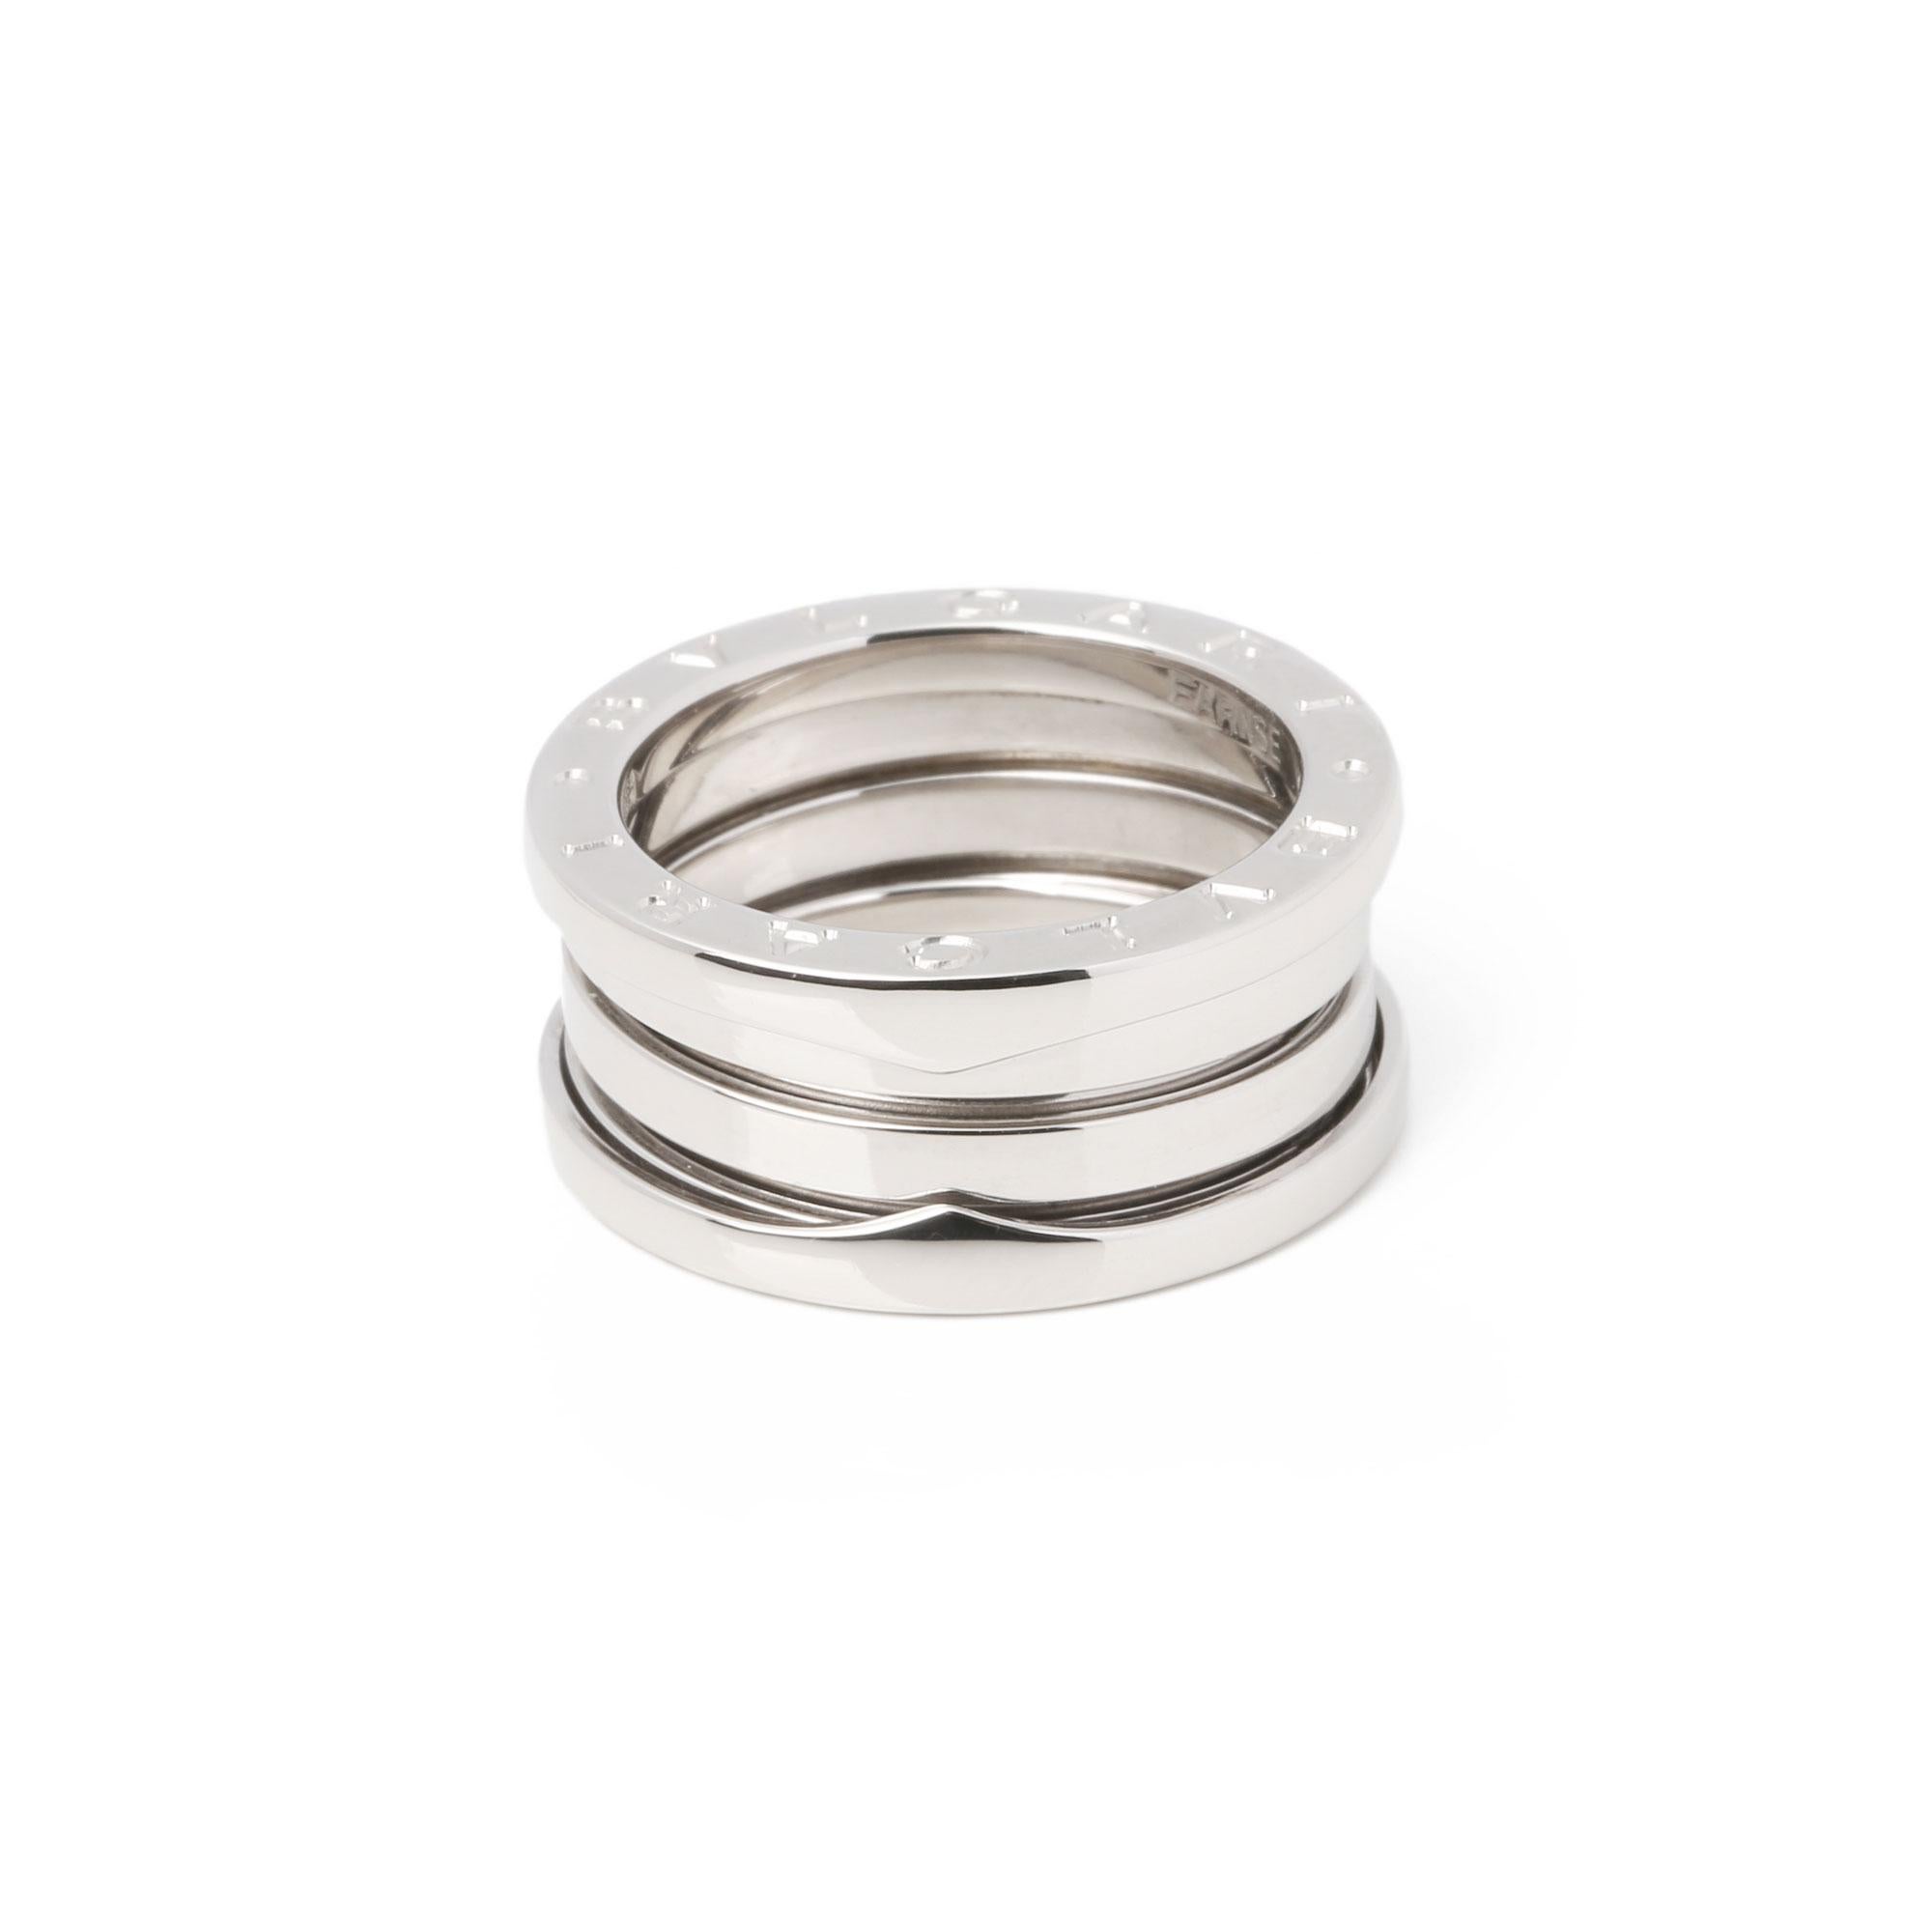 Bulgari 18ct White Gold Three Row B.Zero1 Ring

Brand- Bulgari
Model- Three Row B.zero1 Ring
Product Type- Ring
Material(s)- 18ct White Gold
UK Ring Size- L
EU Ring Size- 51
US Ring Size- 6
Resizing Possible- No

Band Width- 8mm
Total Weight-